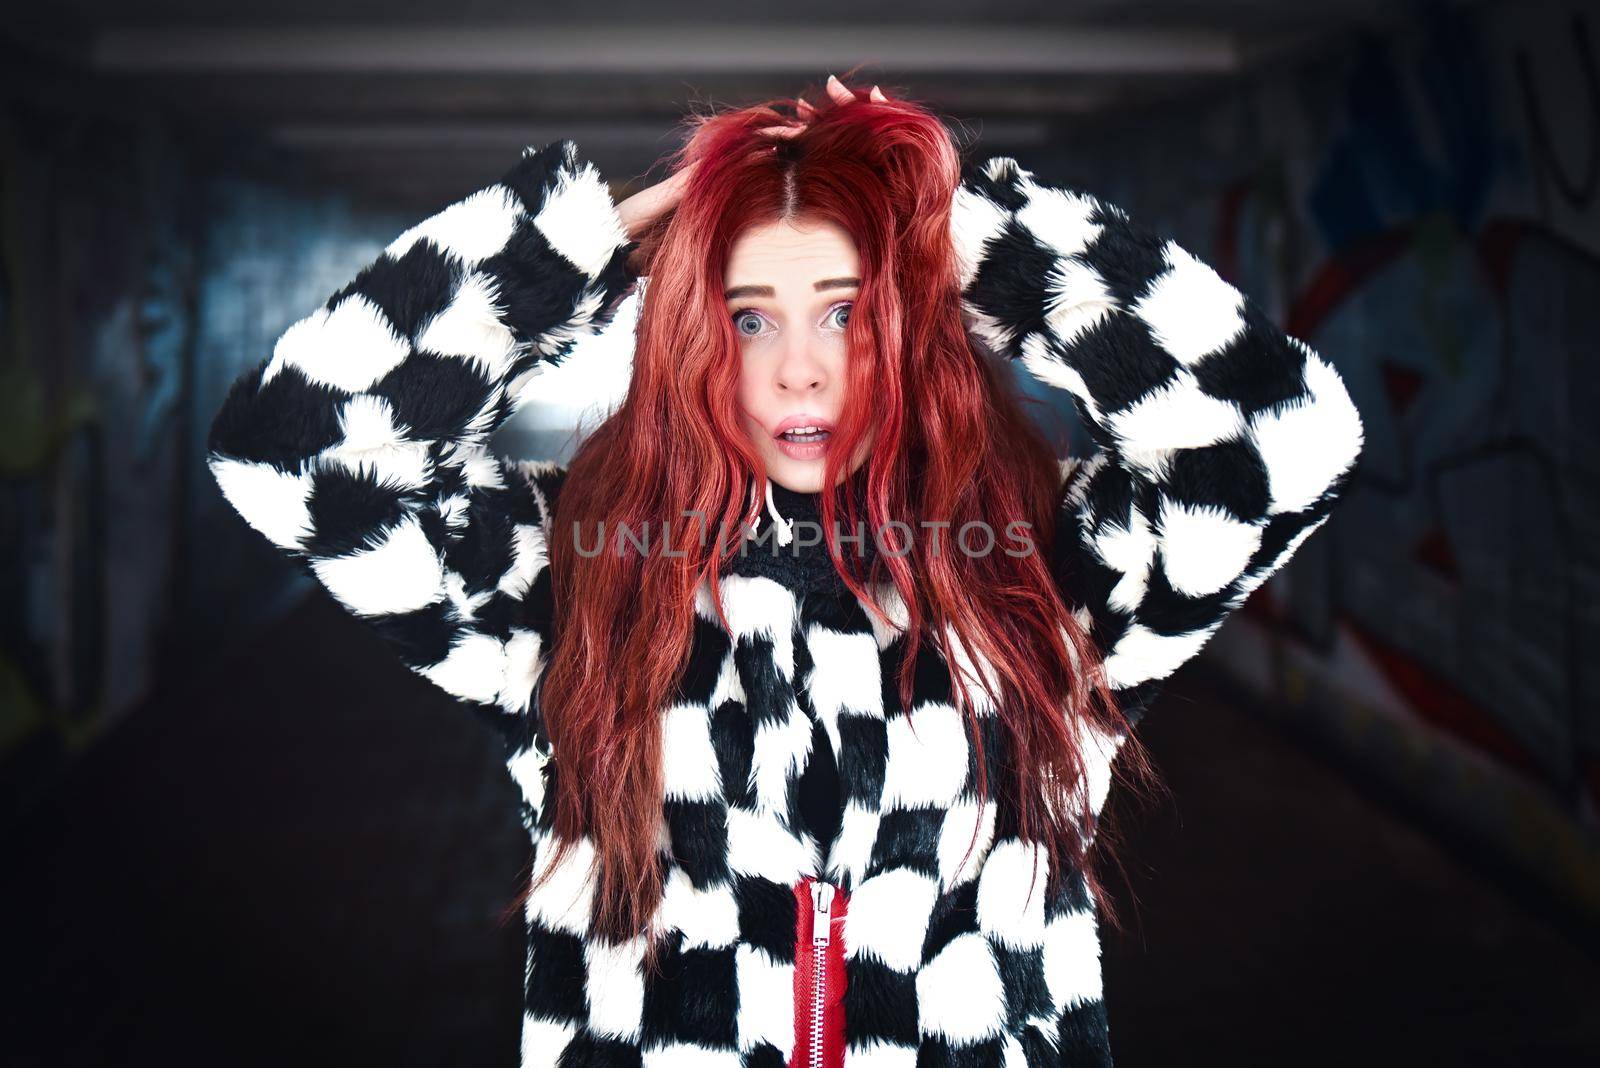 Concepts Against Violence. A very scared Girl with red hair stands near the exit of a dark subway. Expression emotion by Nickstock